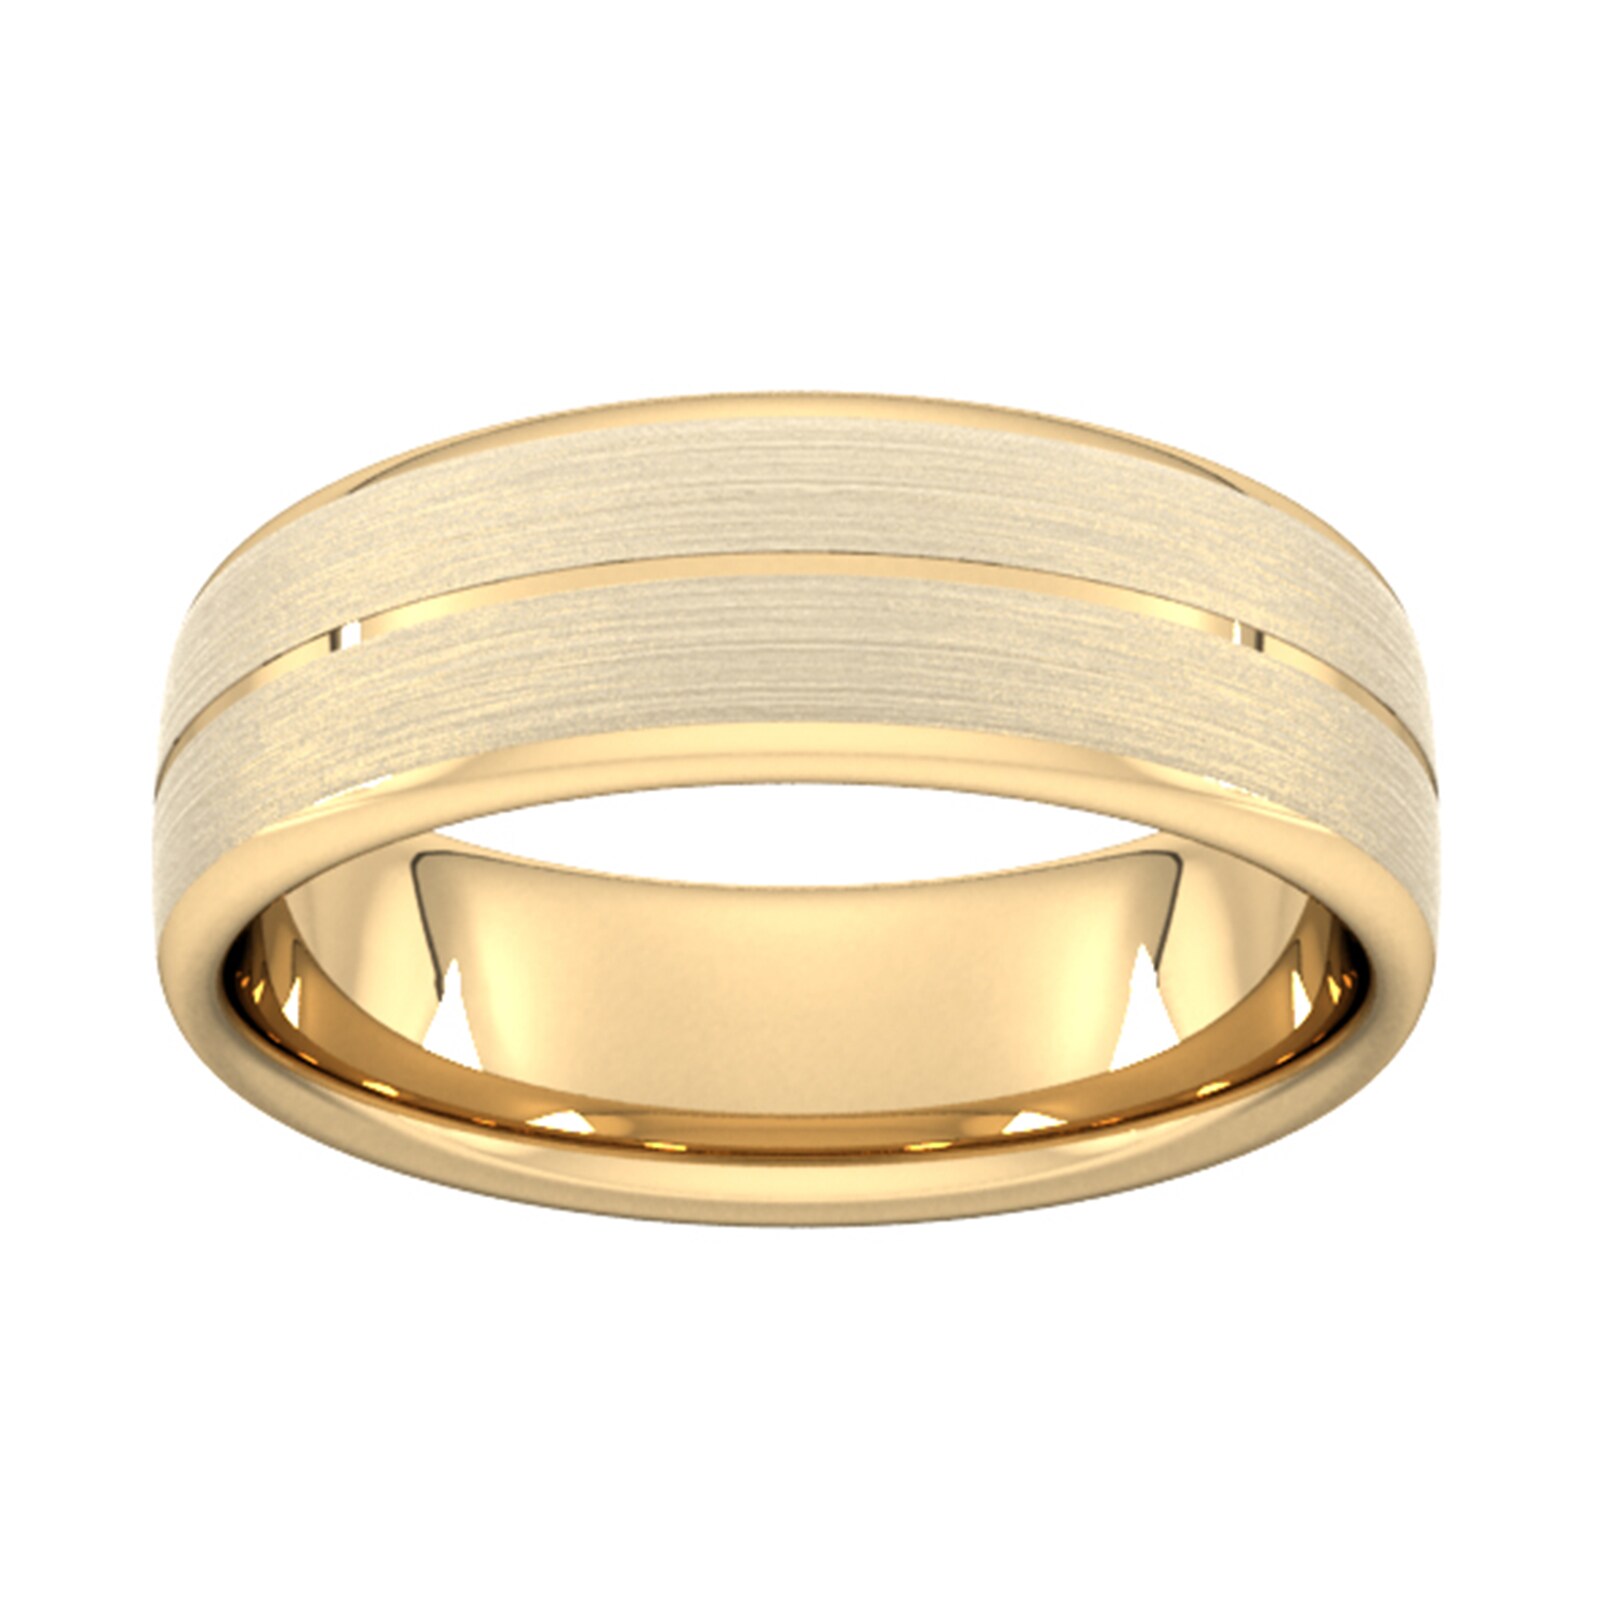 7mm Slight Court Extra Heavy Centre Groove With Chamfered Edge Wedding Ring In 18 Carat Yellow Gold - Ring Size H